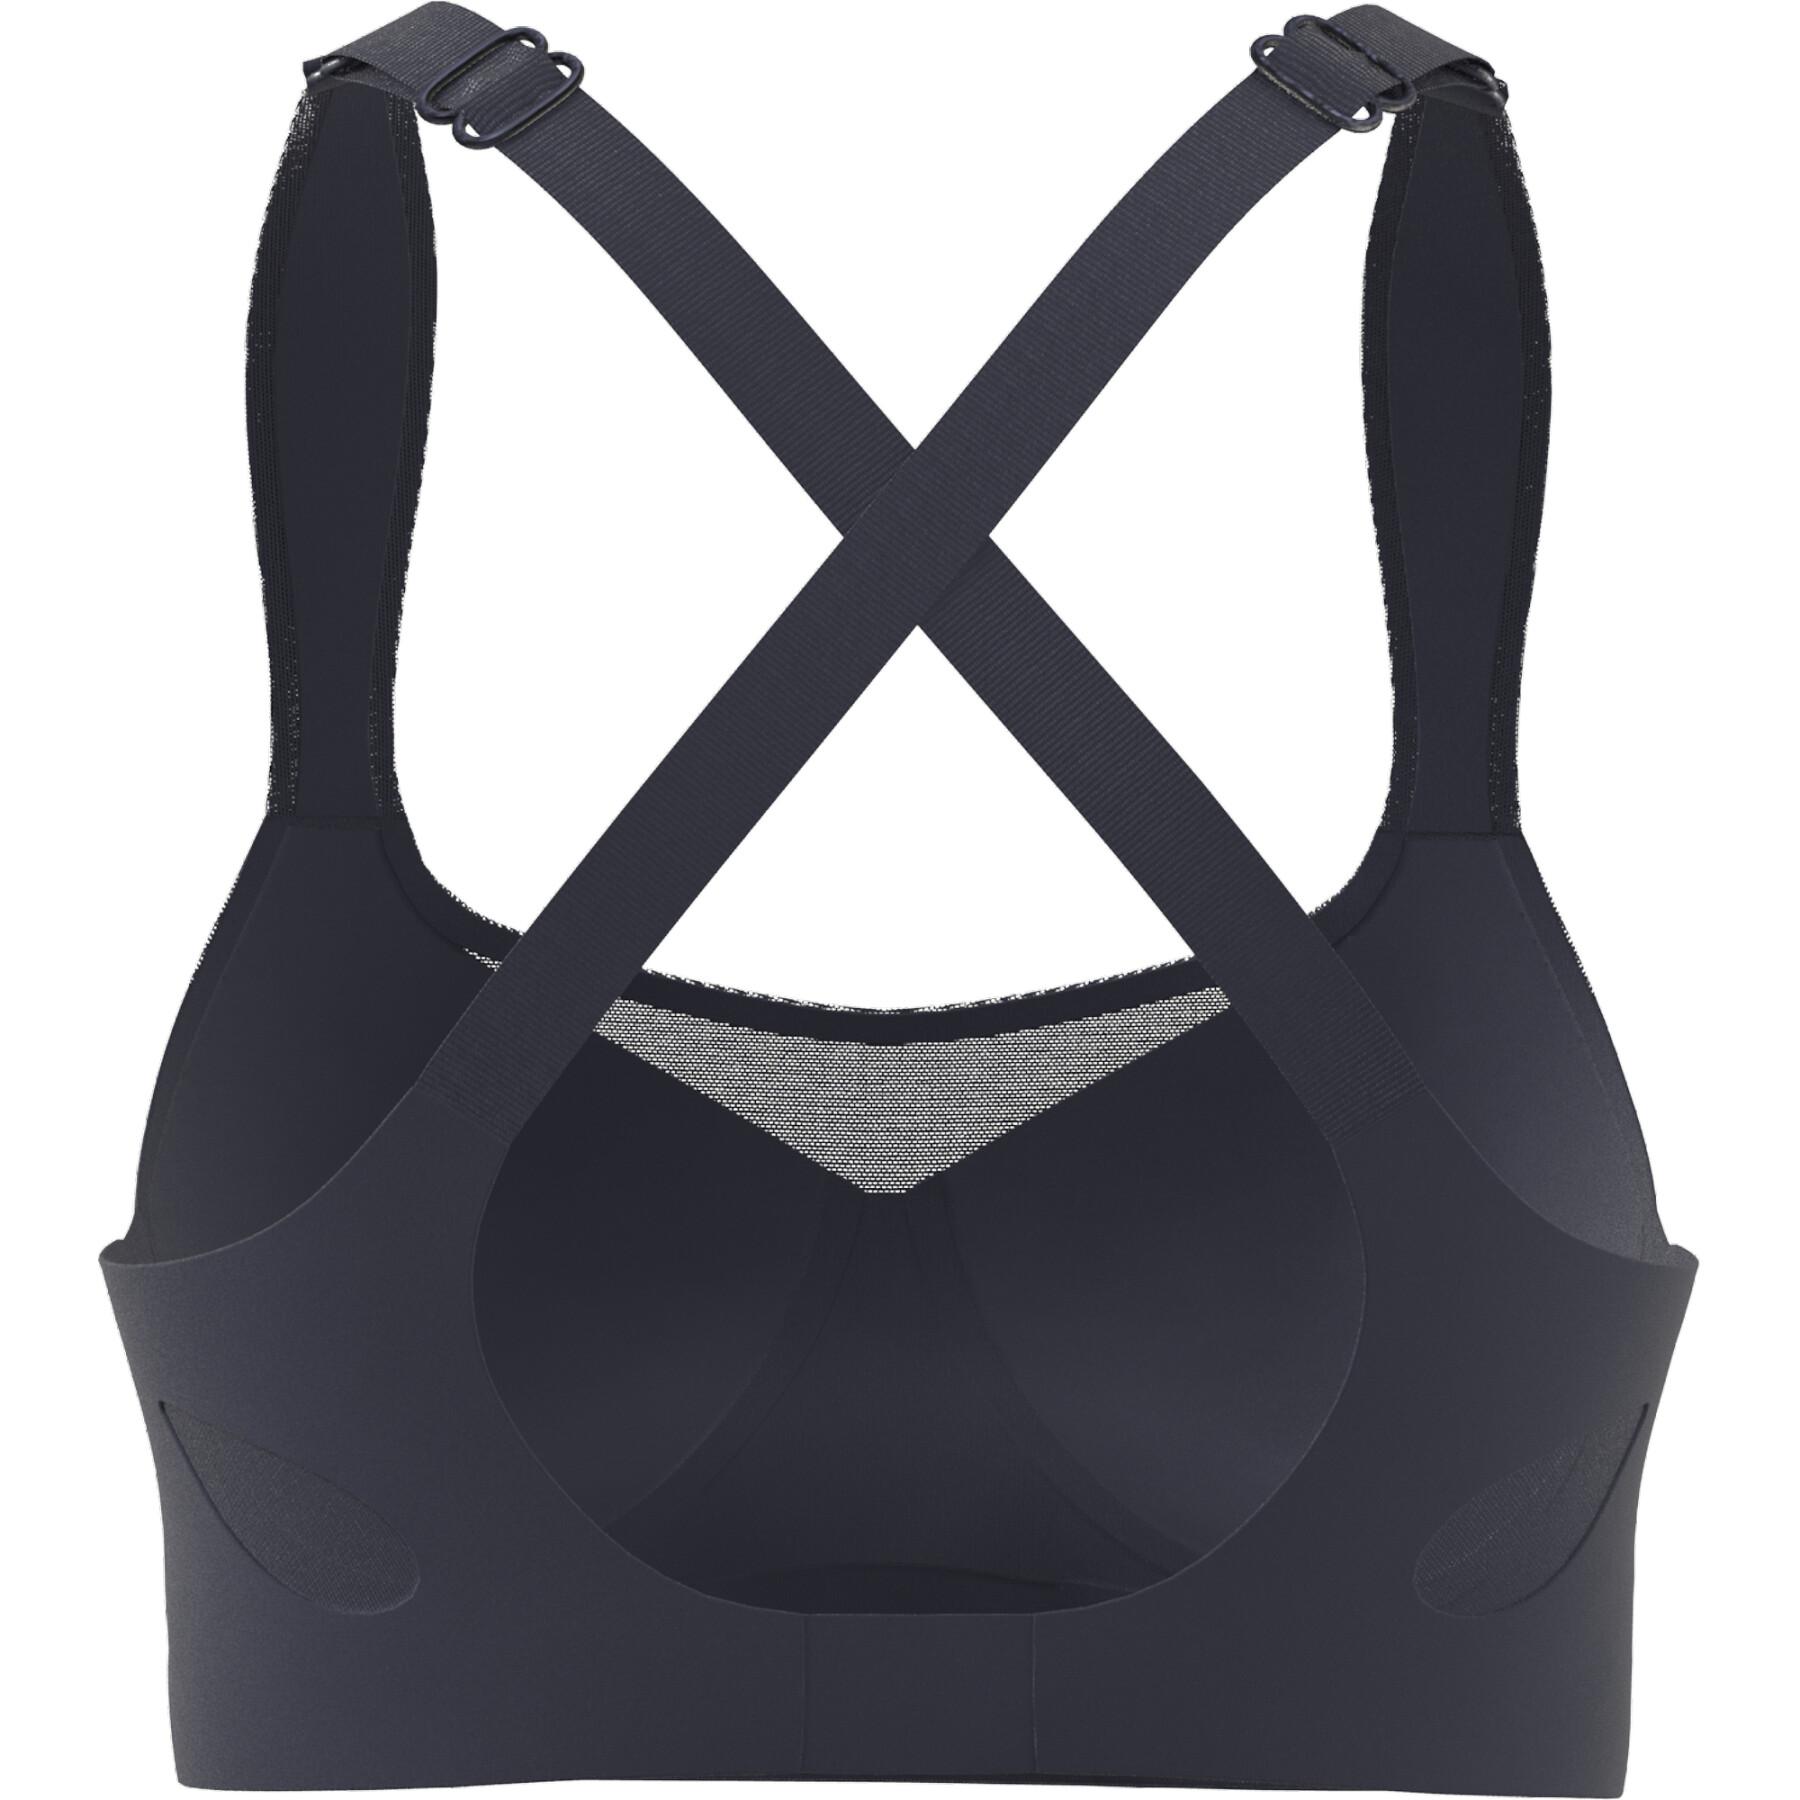 Brassière femme adidas Tlrd Impact Training High-Support